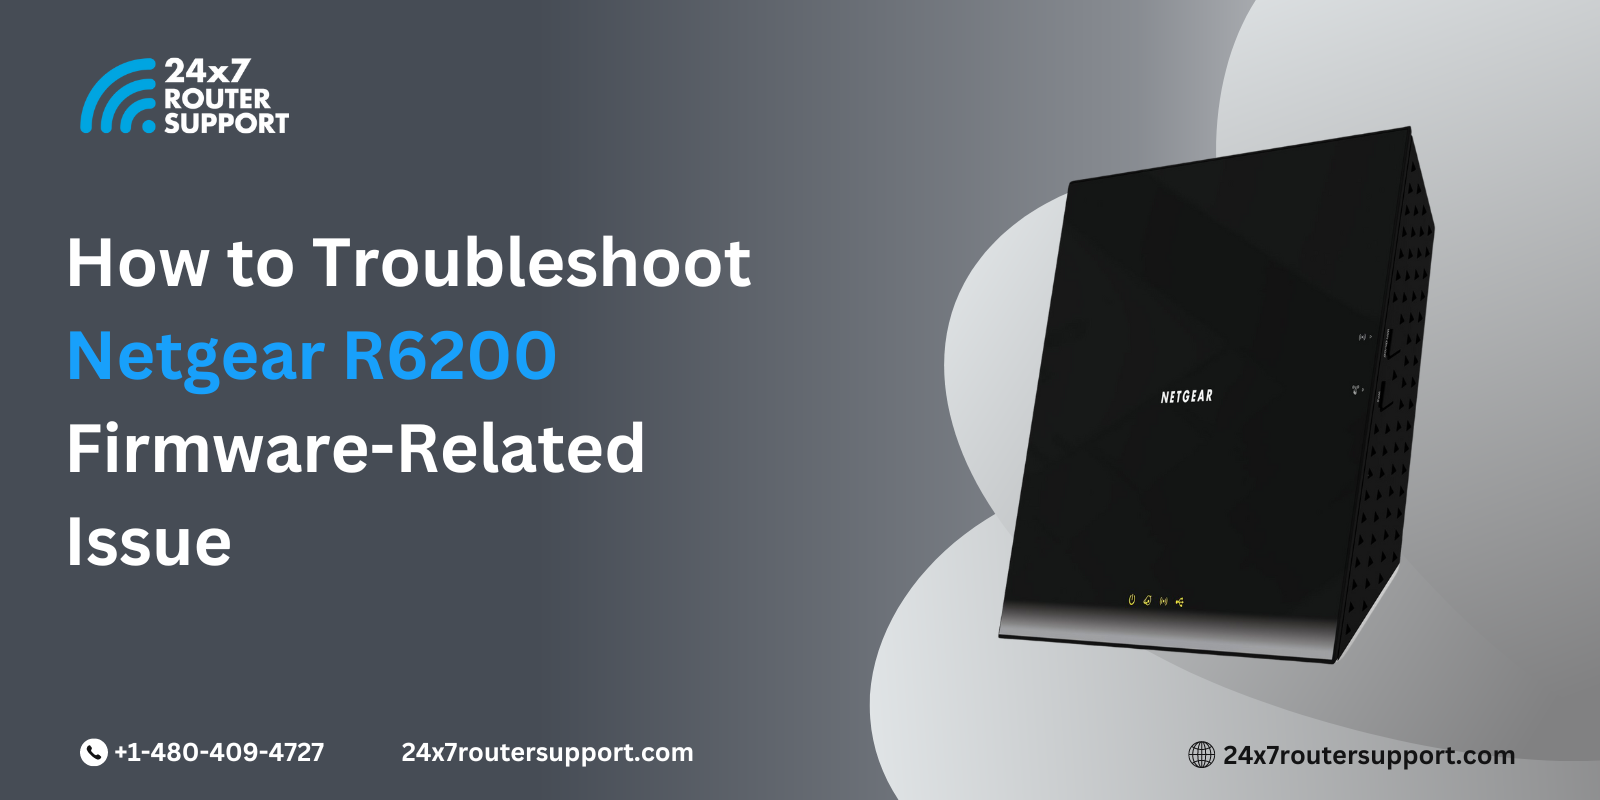 How to Troubleshoot Netgear R6200 Firmware-Related Issue